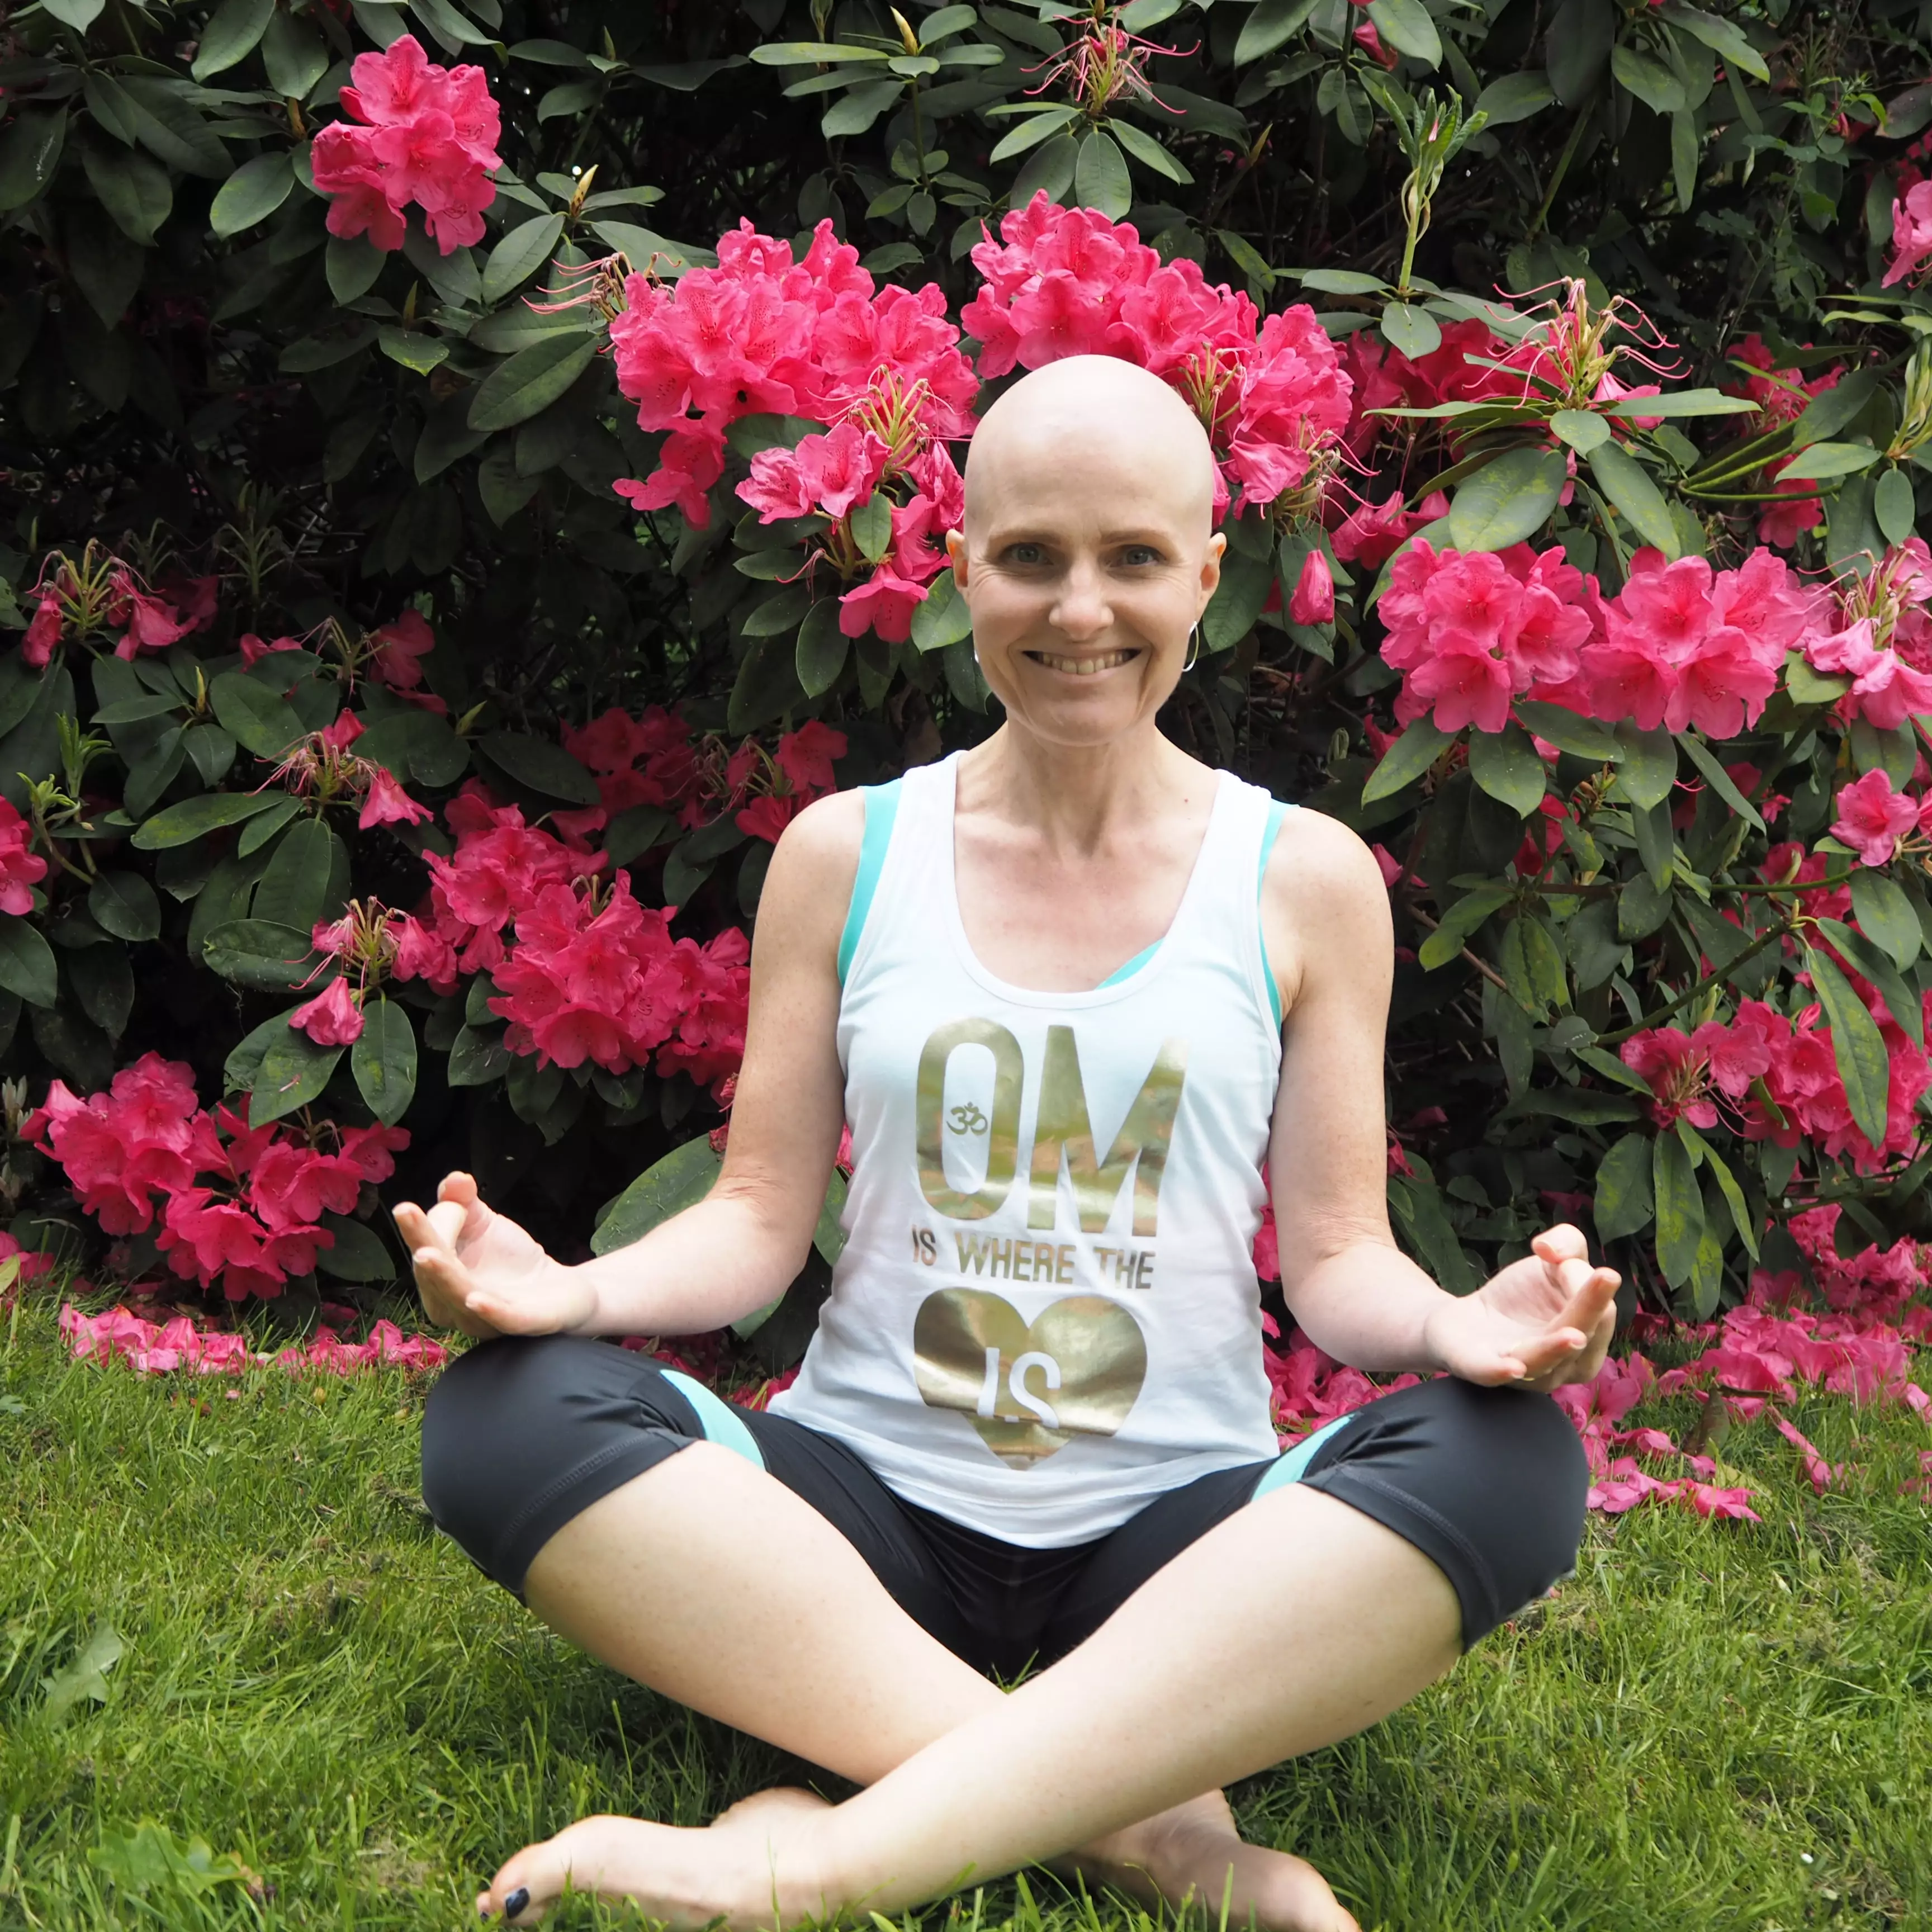 Patricia practised yoga while having chemotherapy